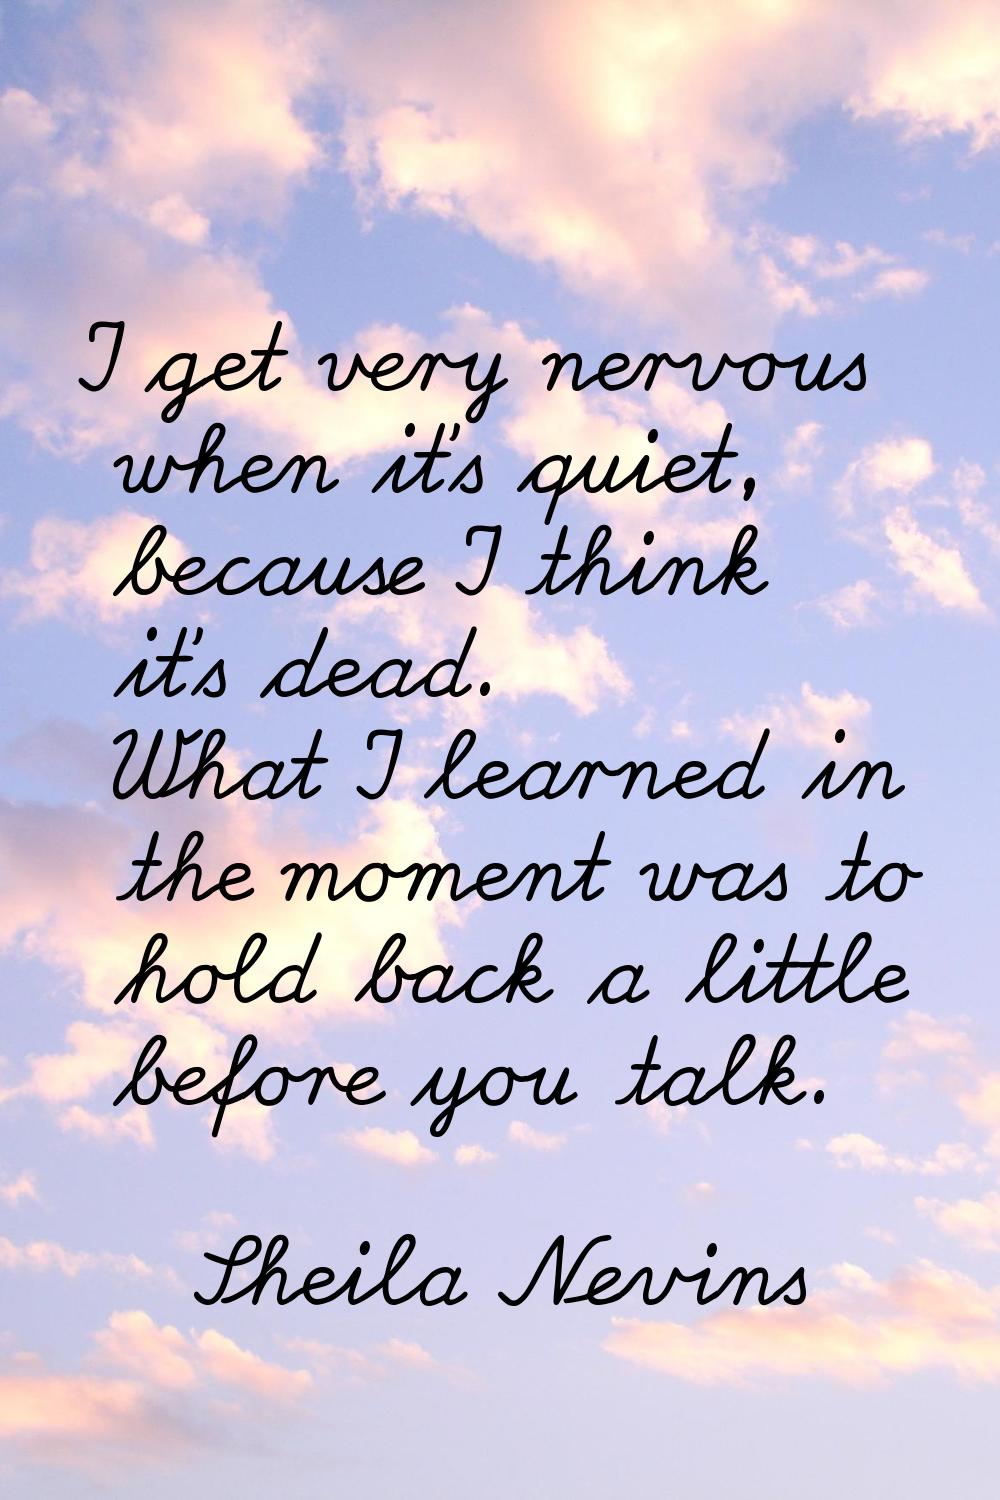 I get very nervous when it's quiet, because I think it's dead. What I learned in the moment was to 